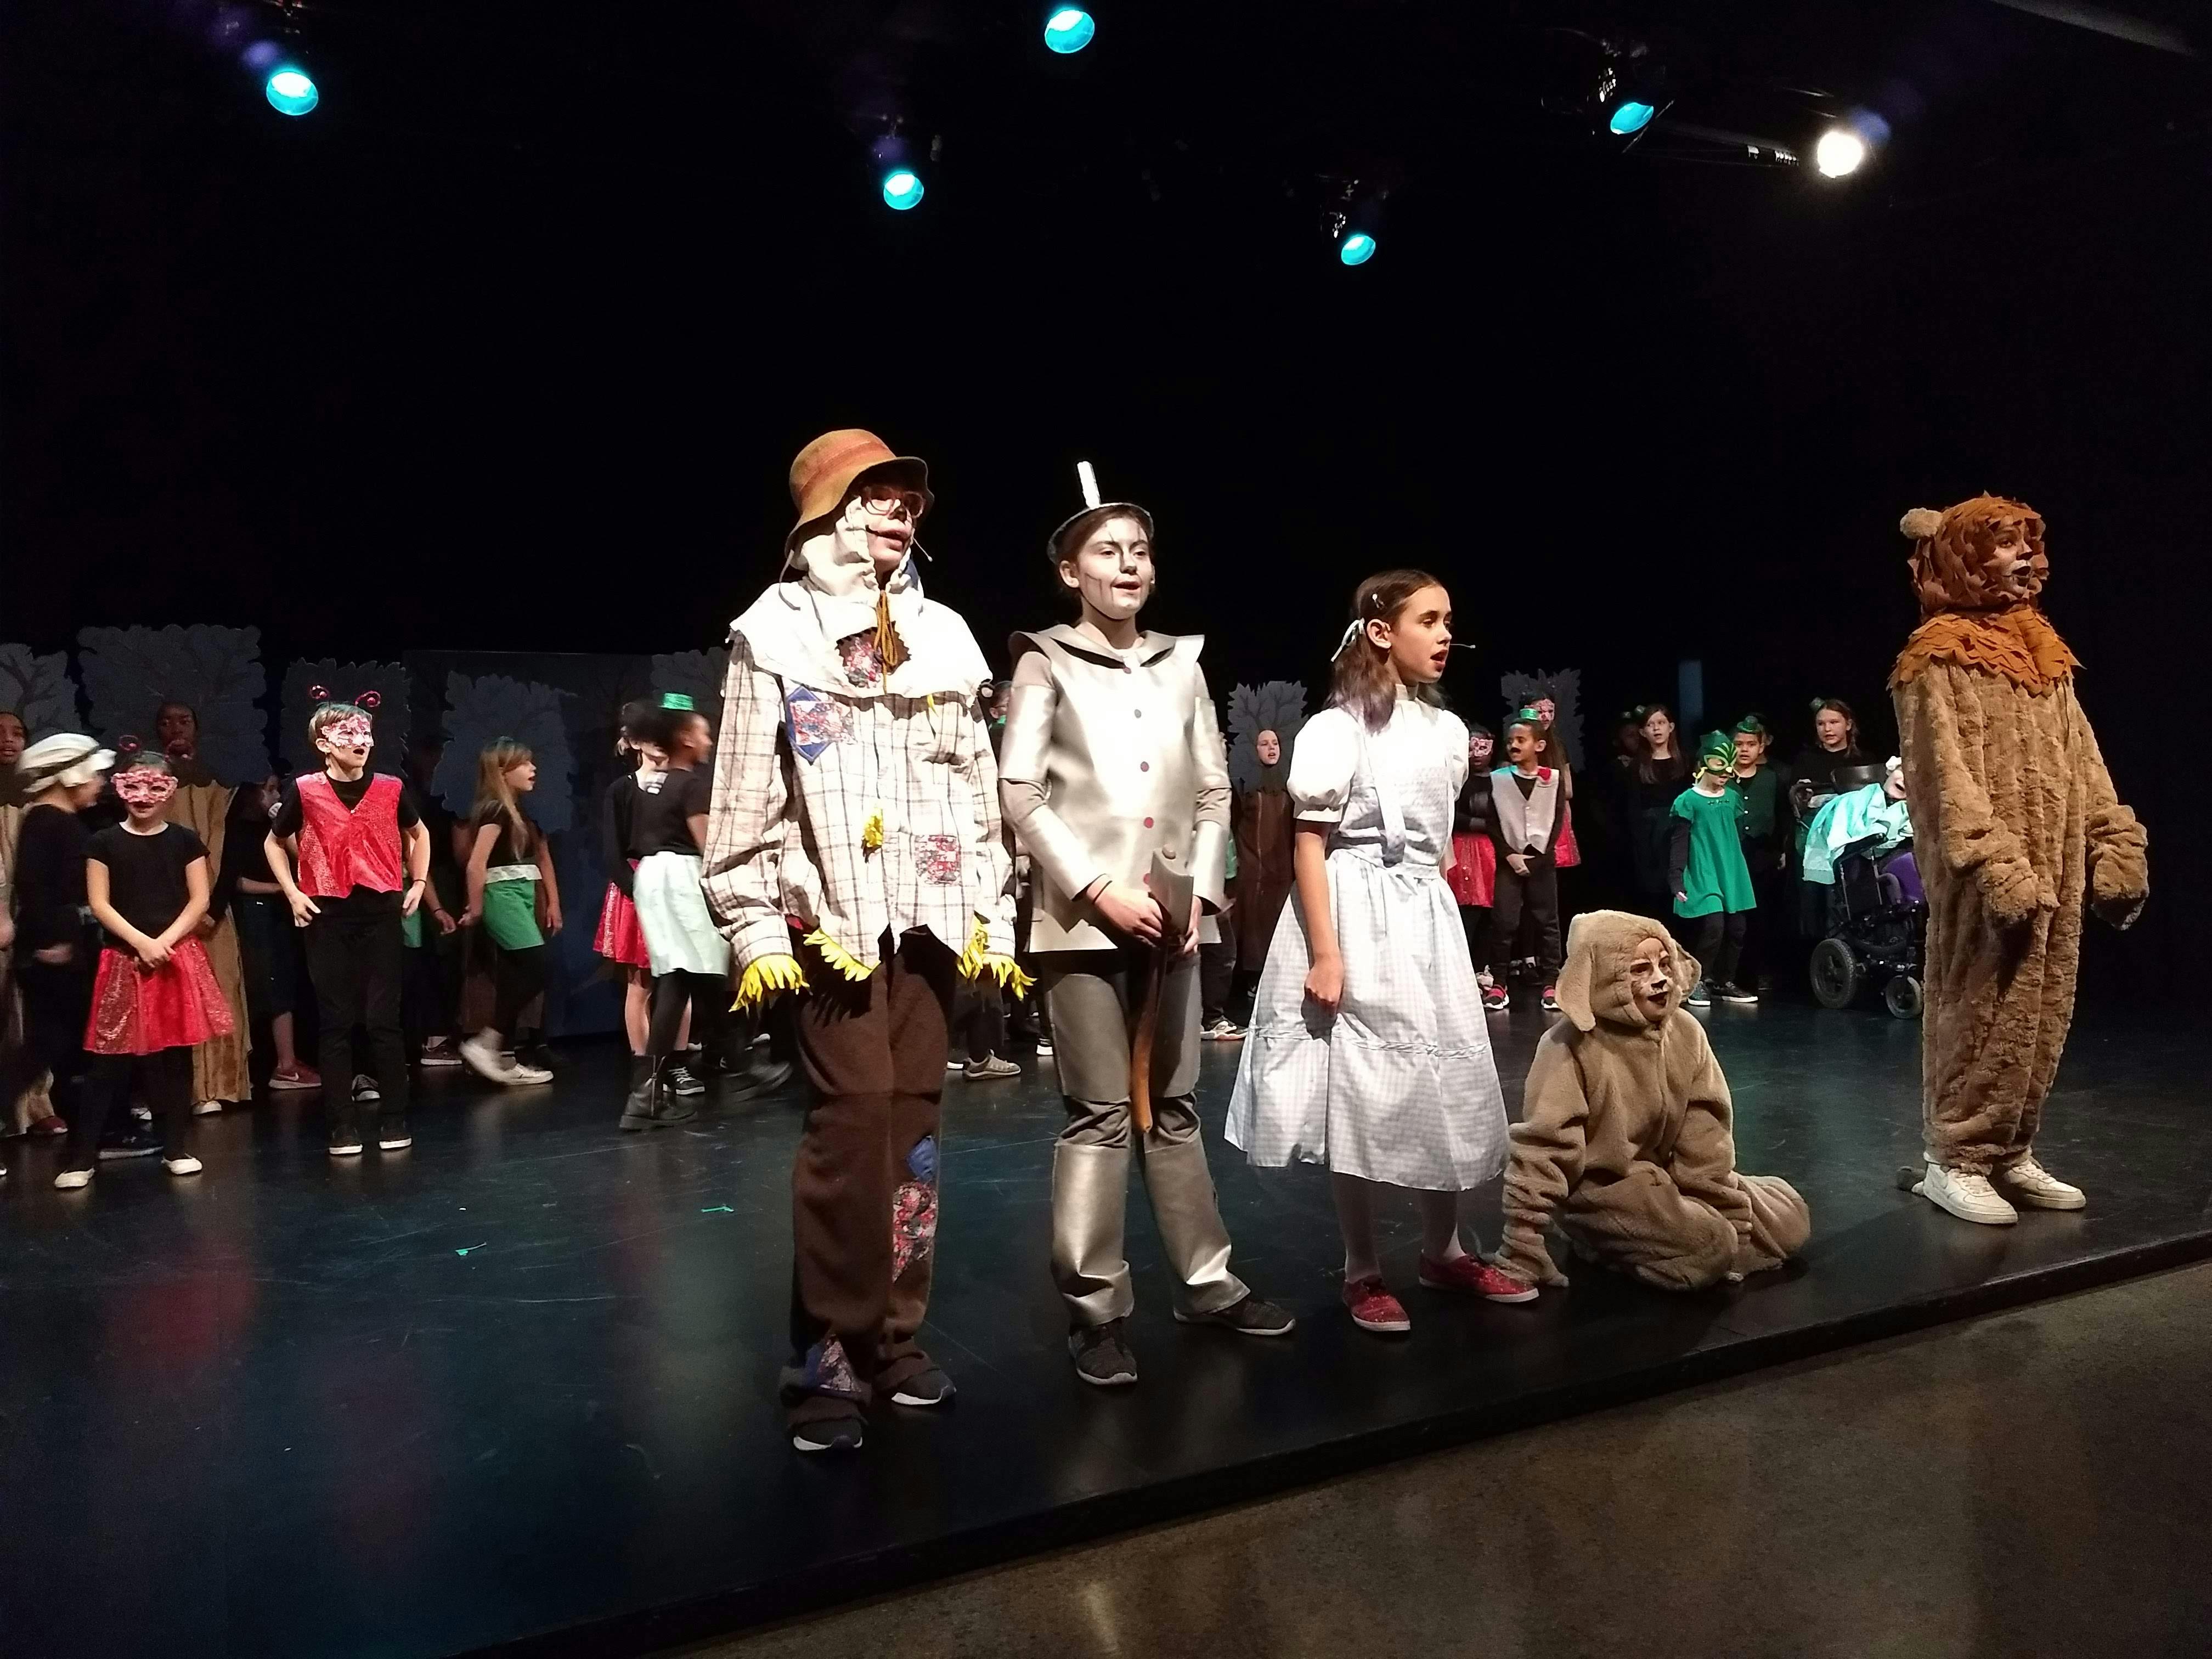 School play with kids performing the Wizard of Oz